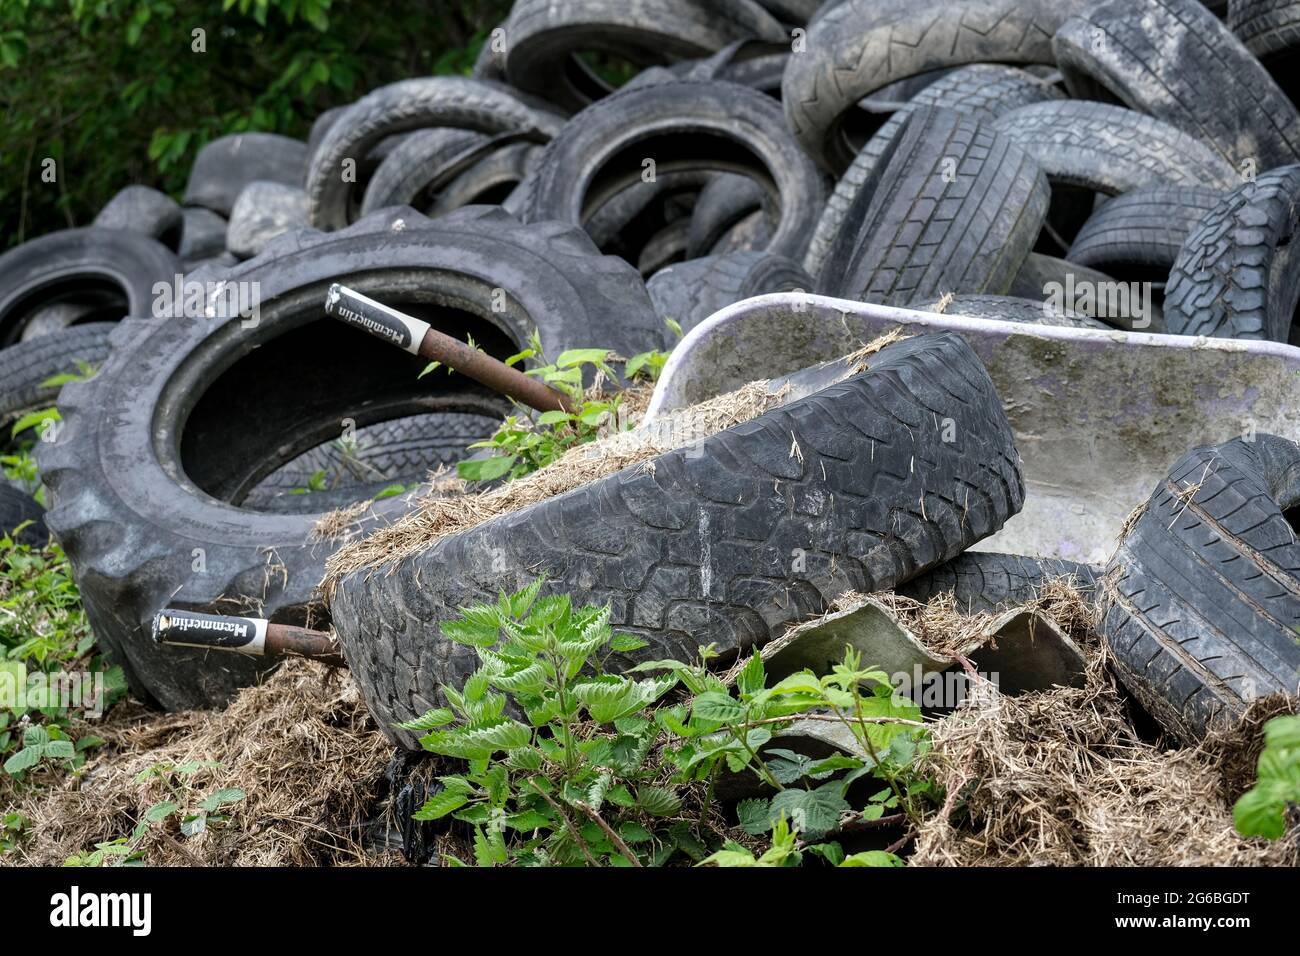 Pile of Tyres in a farnyard Stock Photo